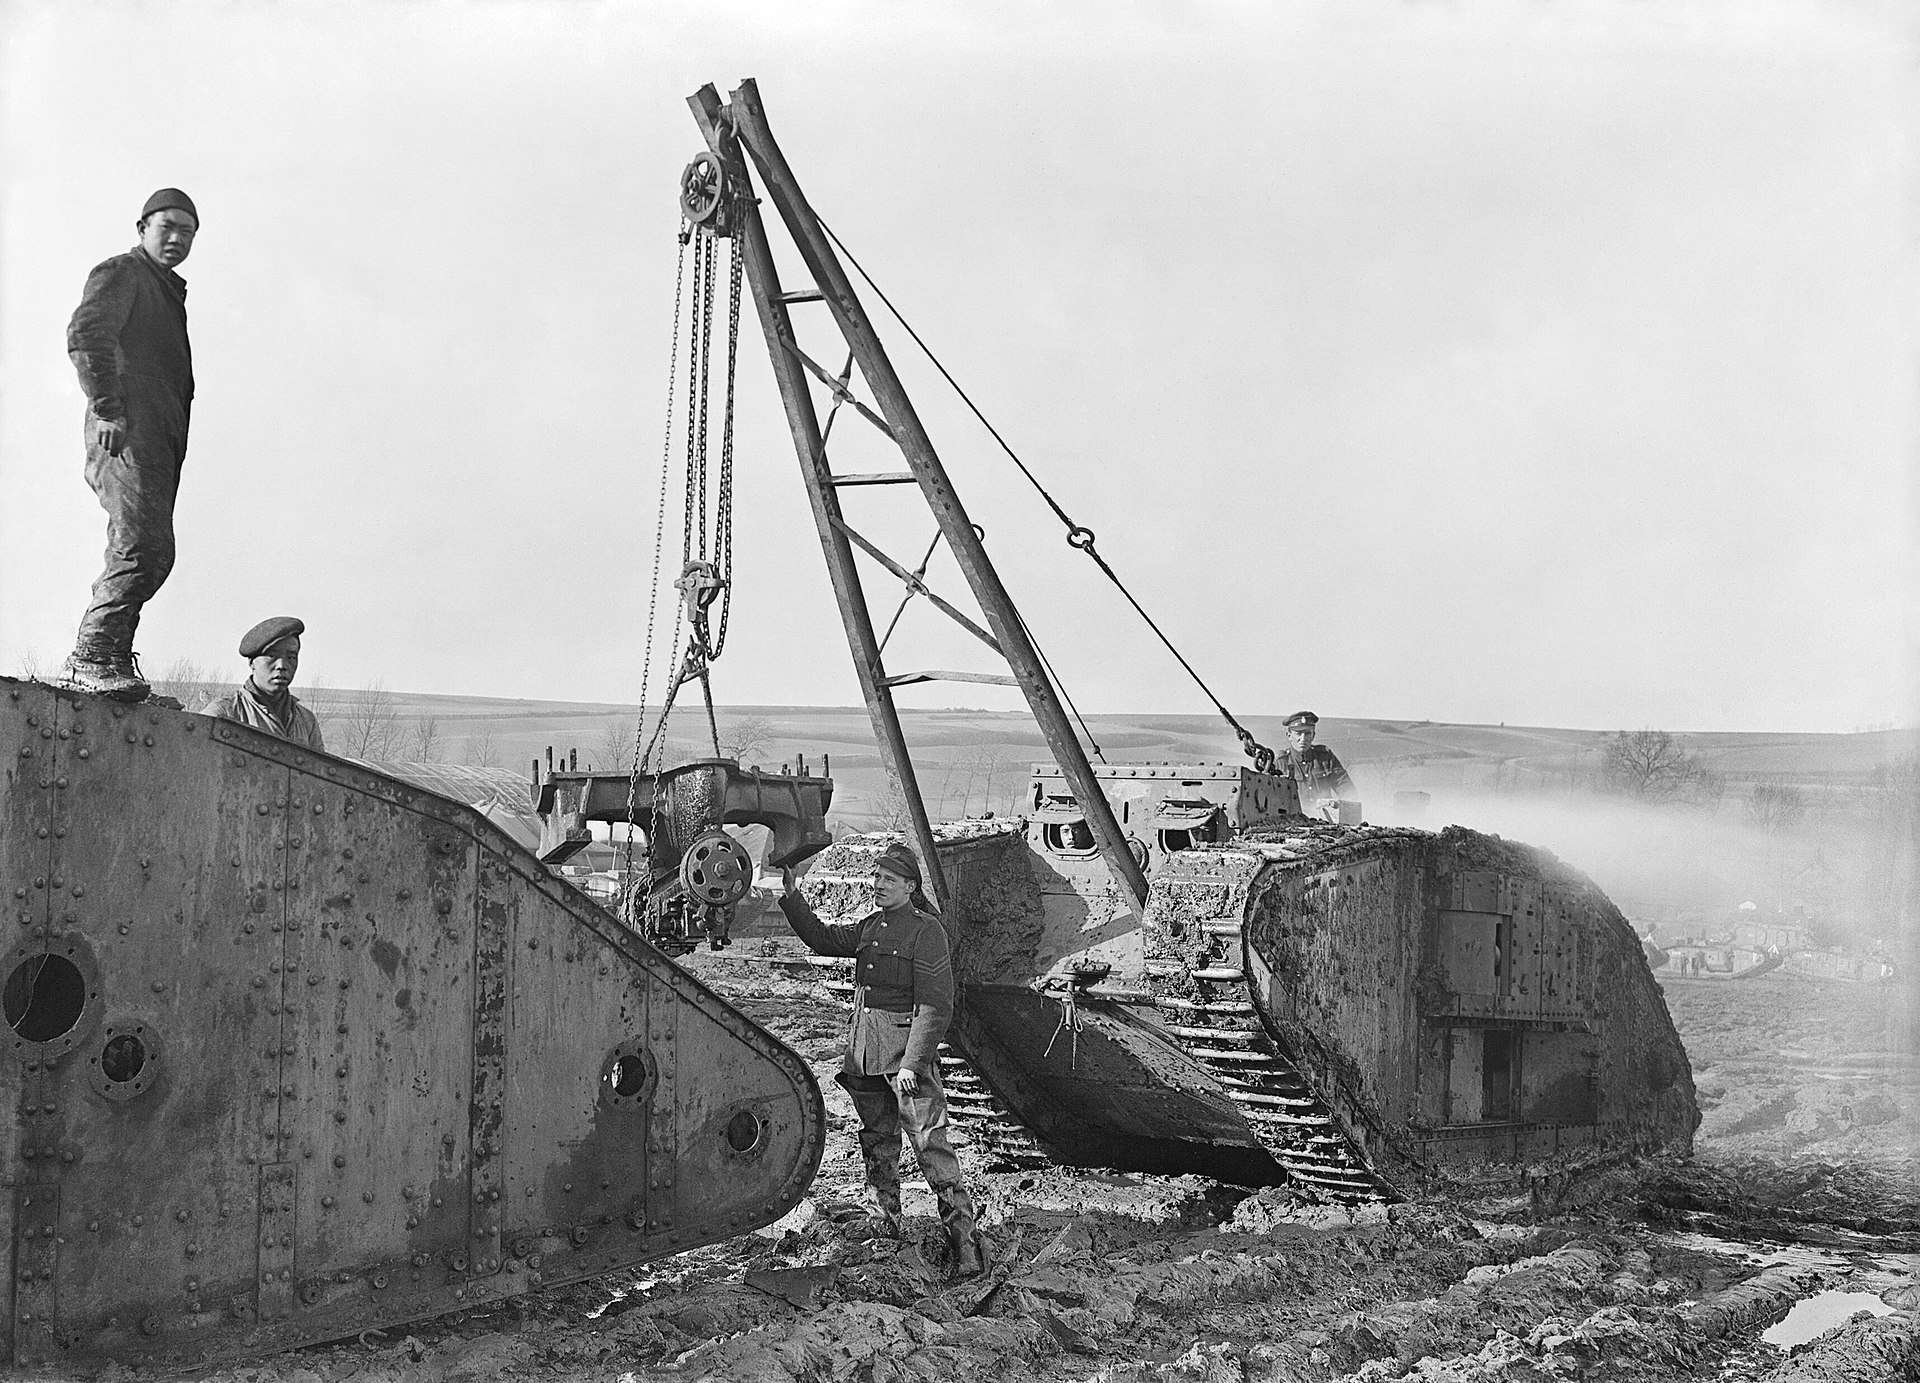 A Mark IV salvage vehicle removing components off another Mark IV tank.